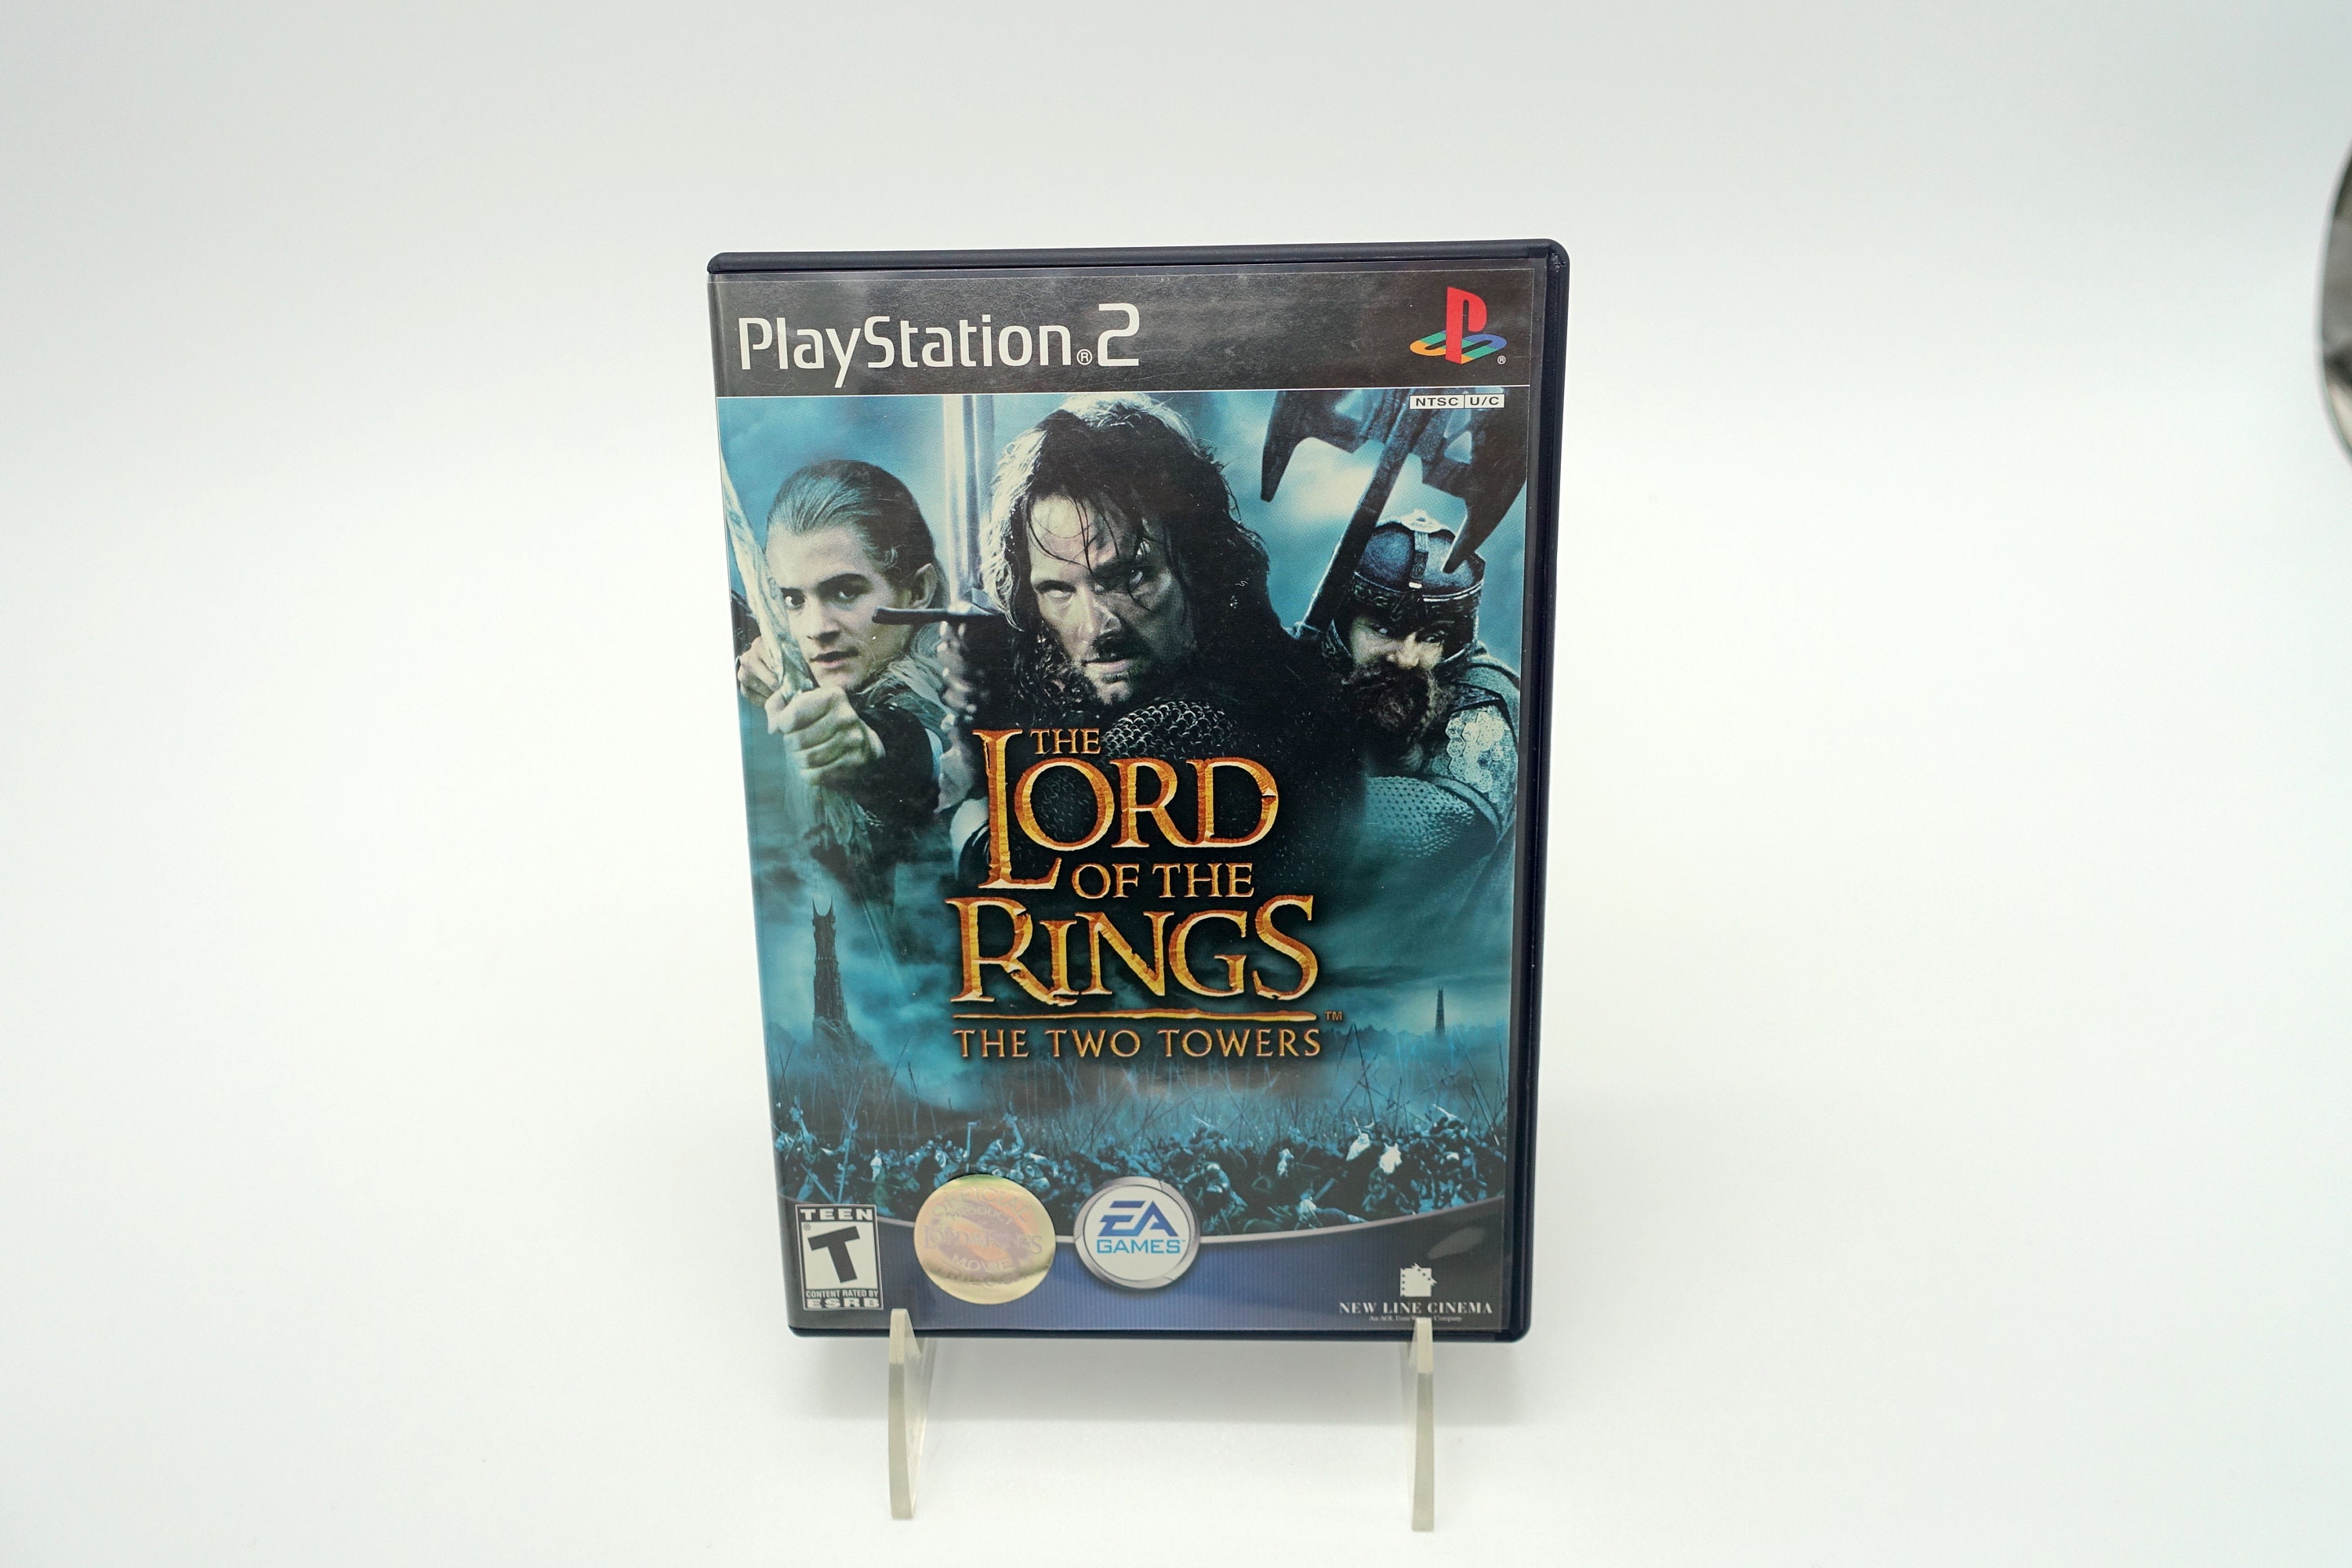 The Two Towers — The Lord of the Rings Series - Plugged In